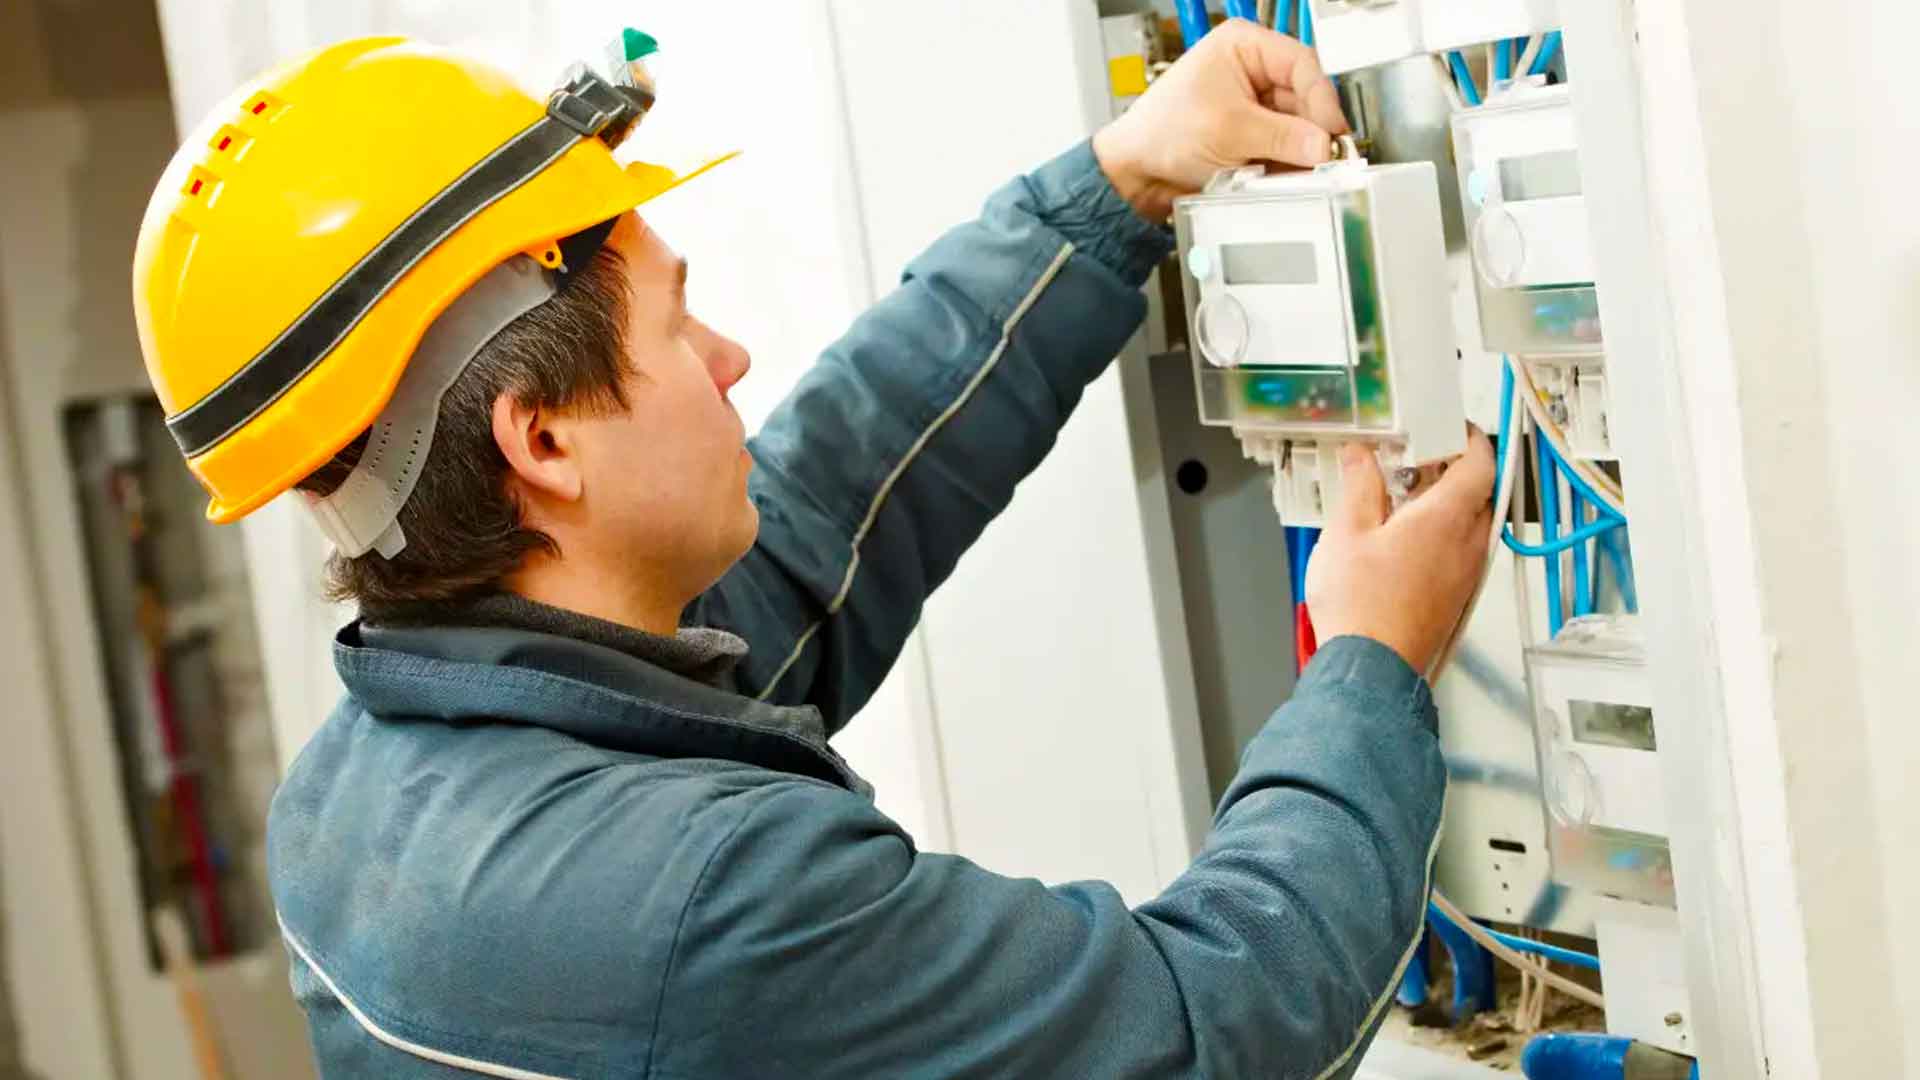 Meter installation and supply live within two weeks